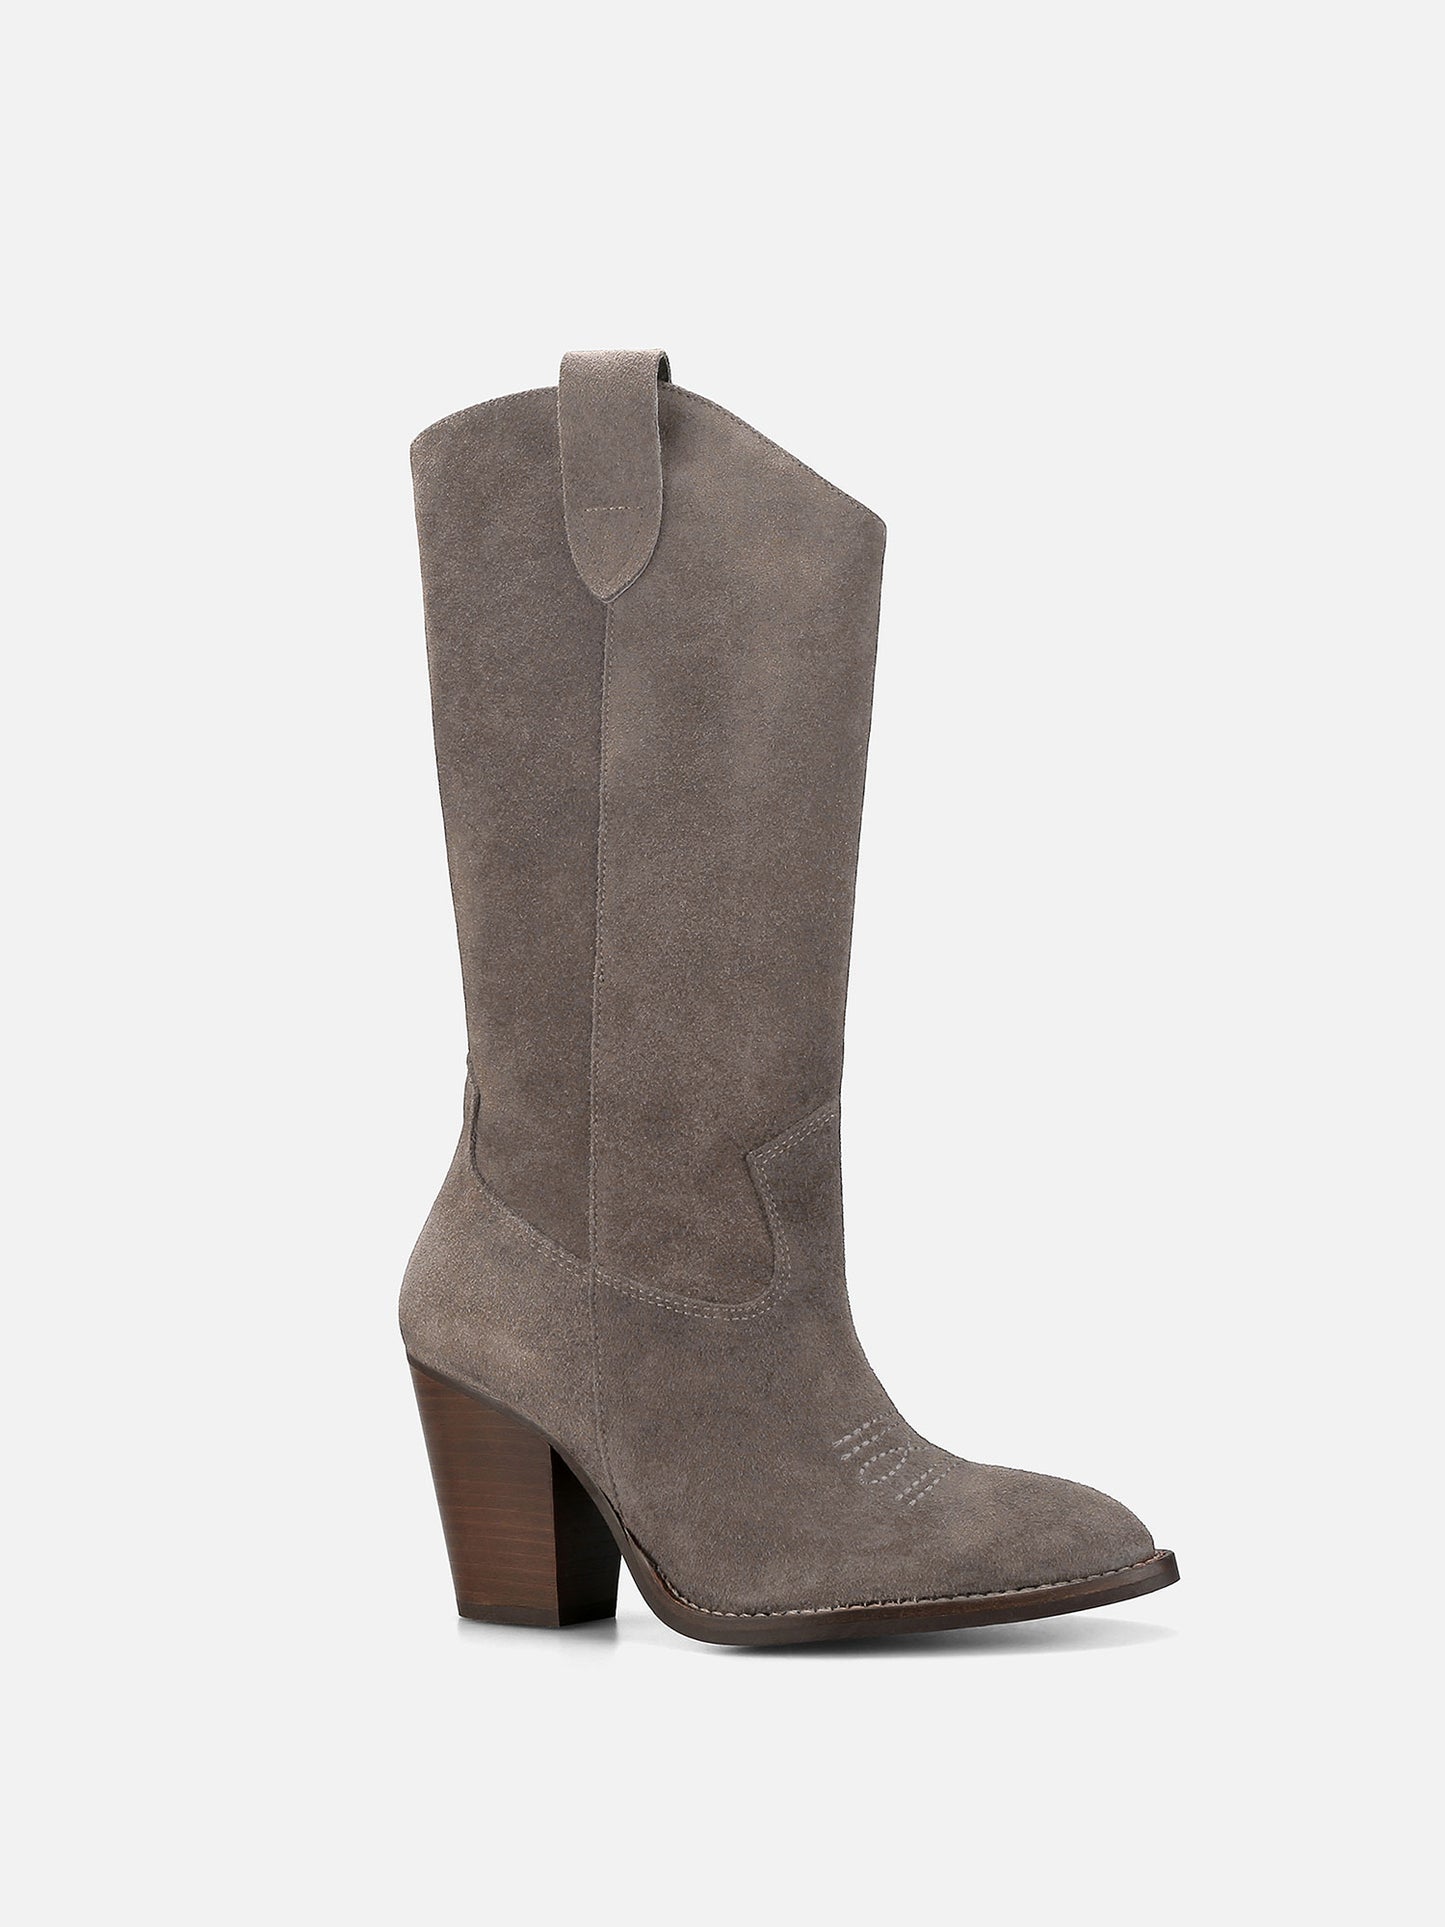 KELLIE Western Suede Boots - Taupe